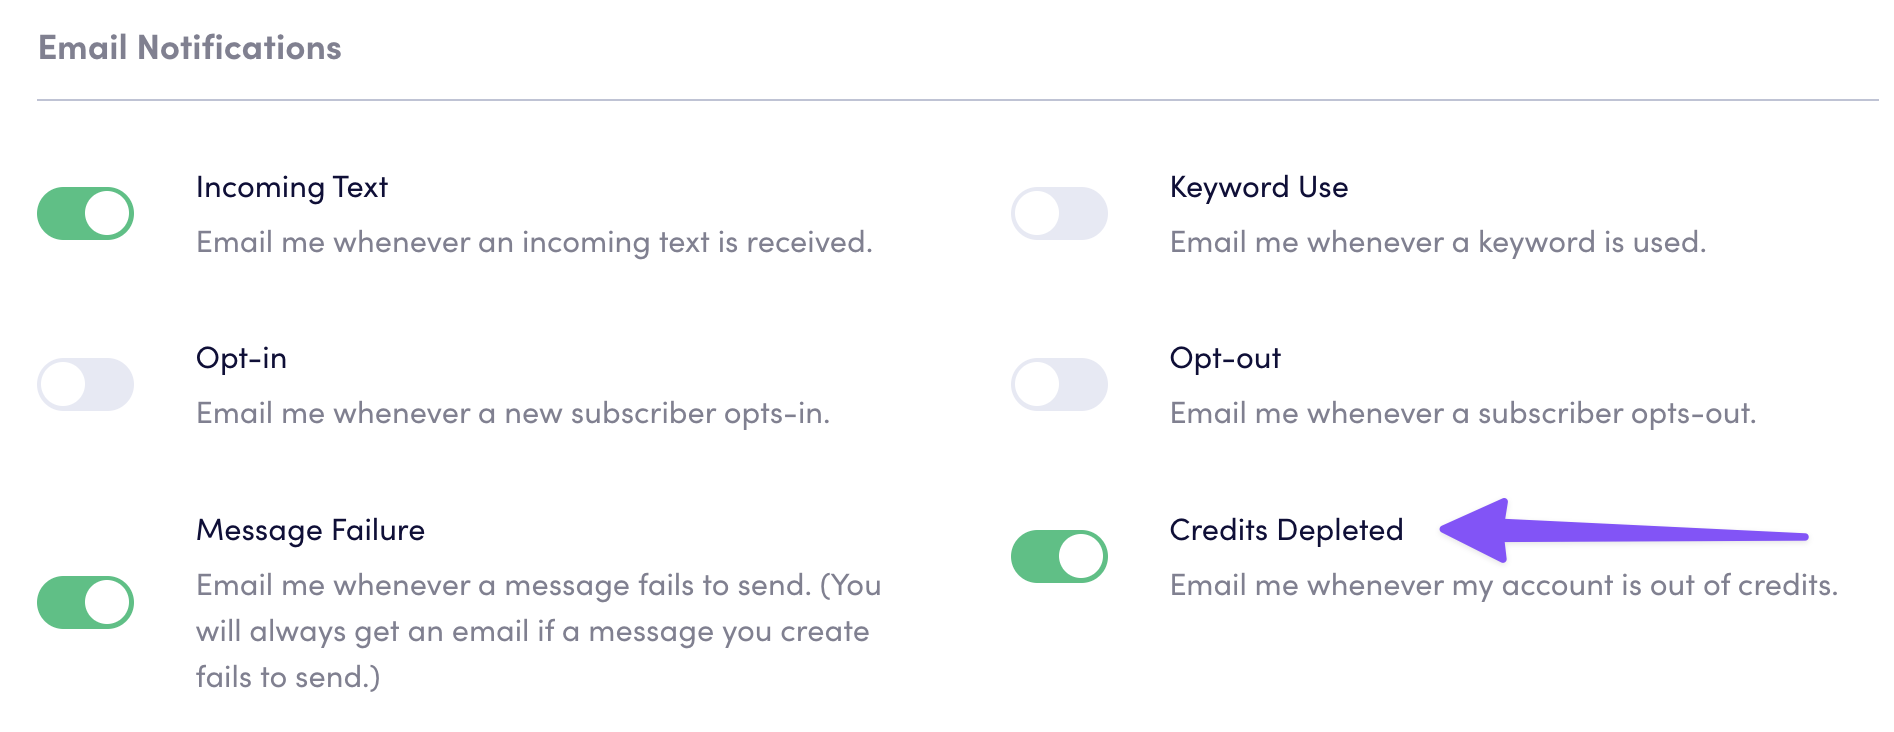 Email Notifications - Credits Depleted